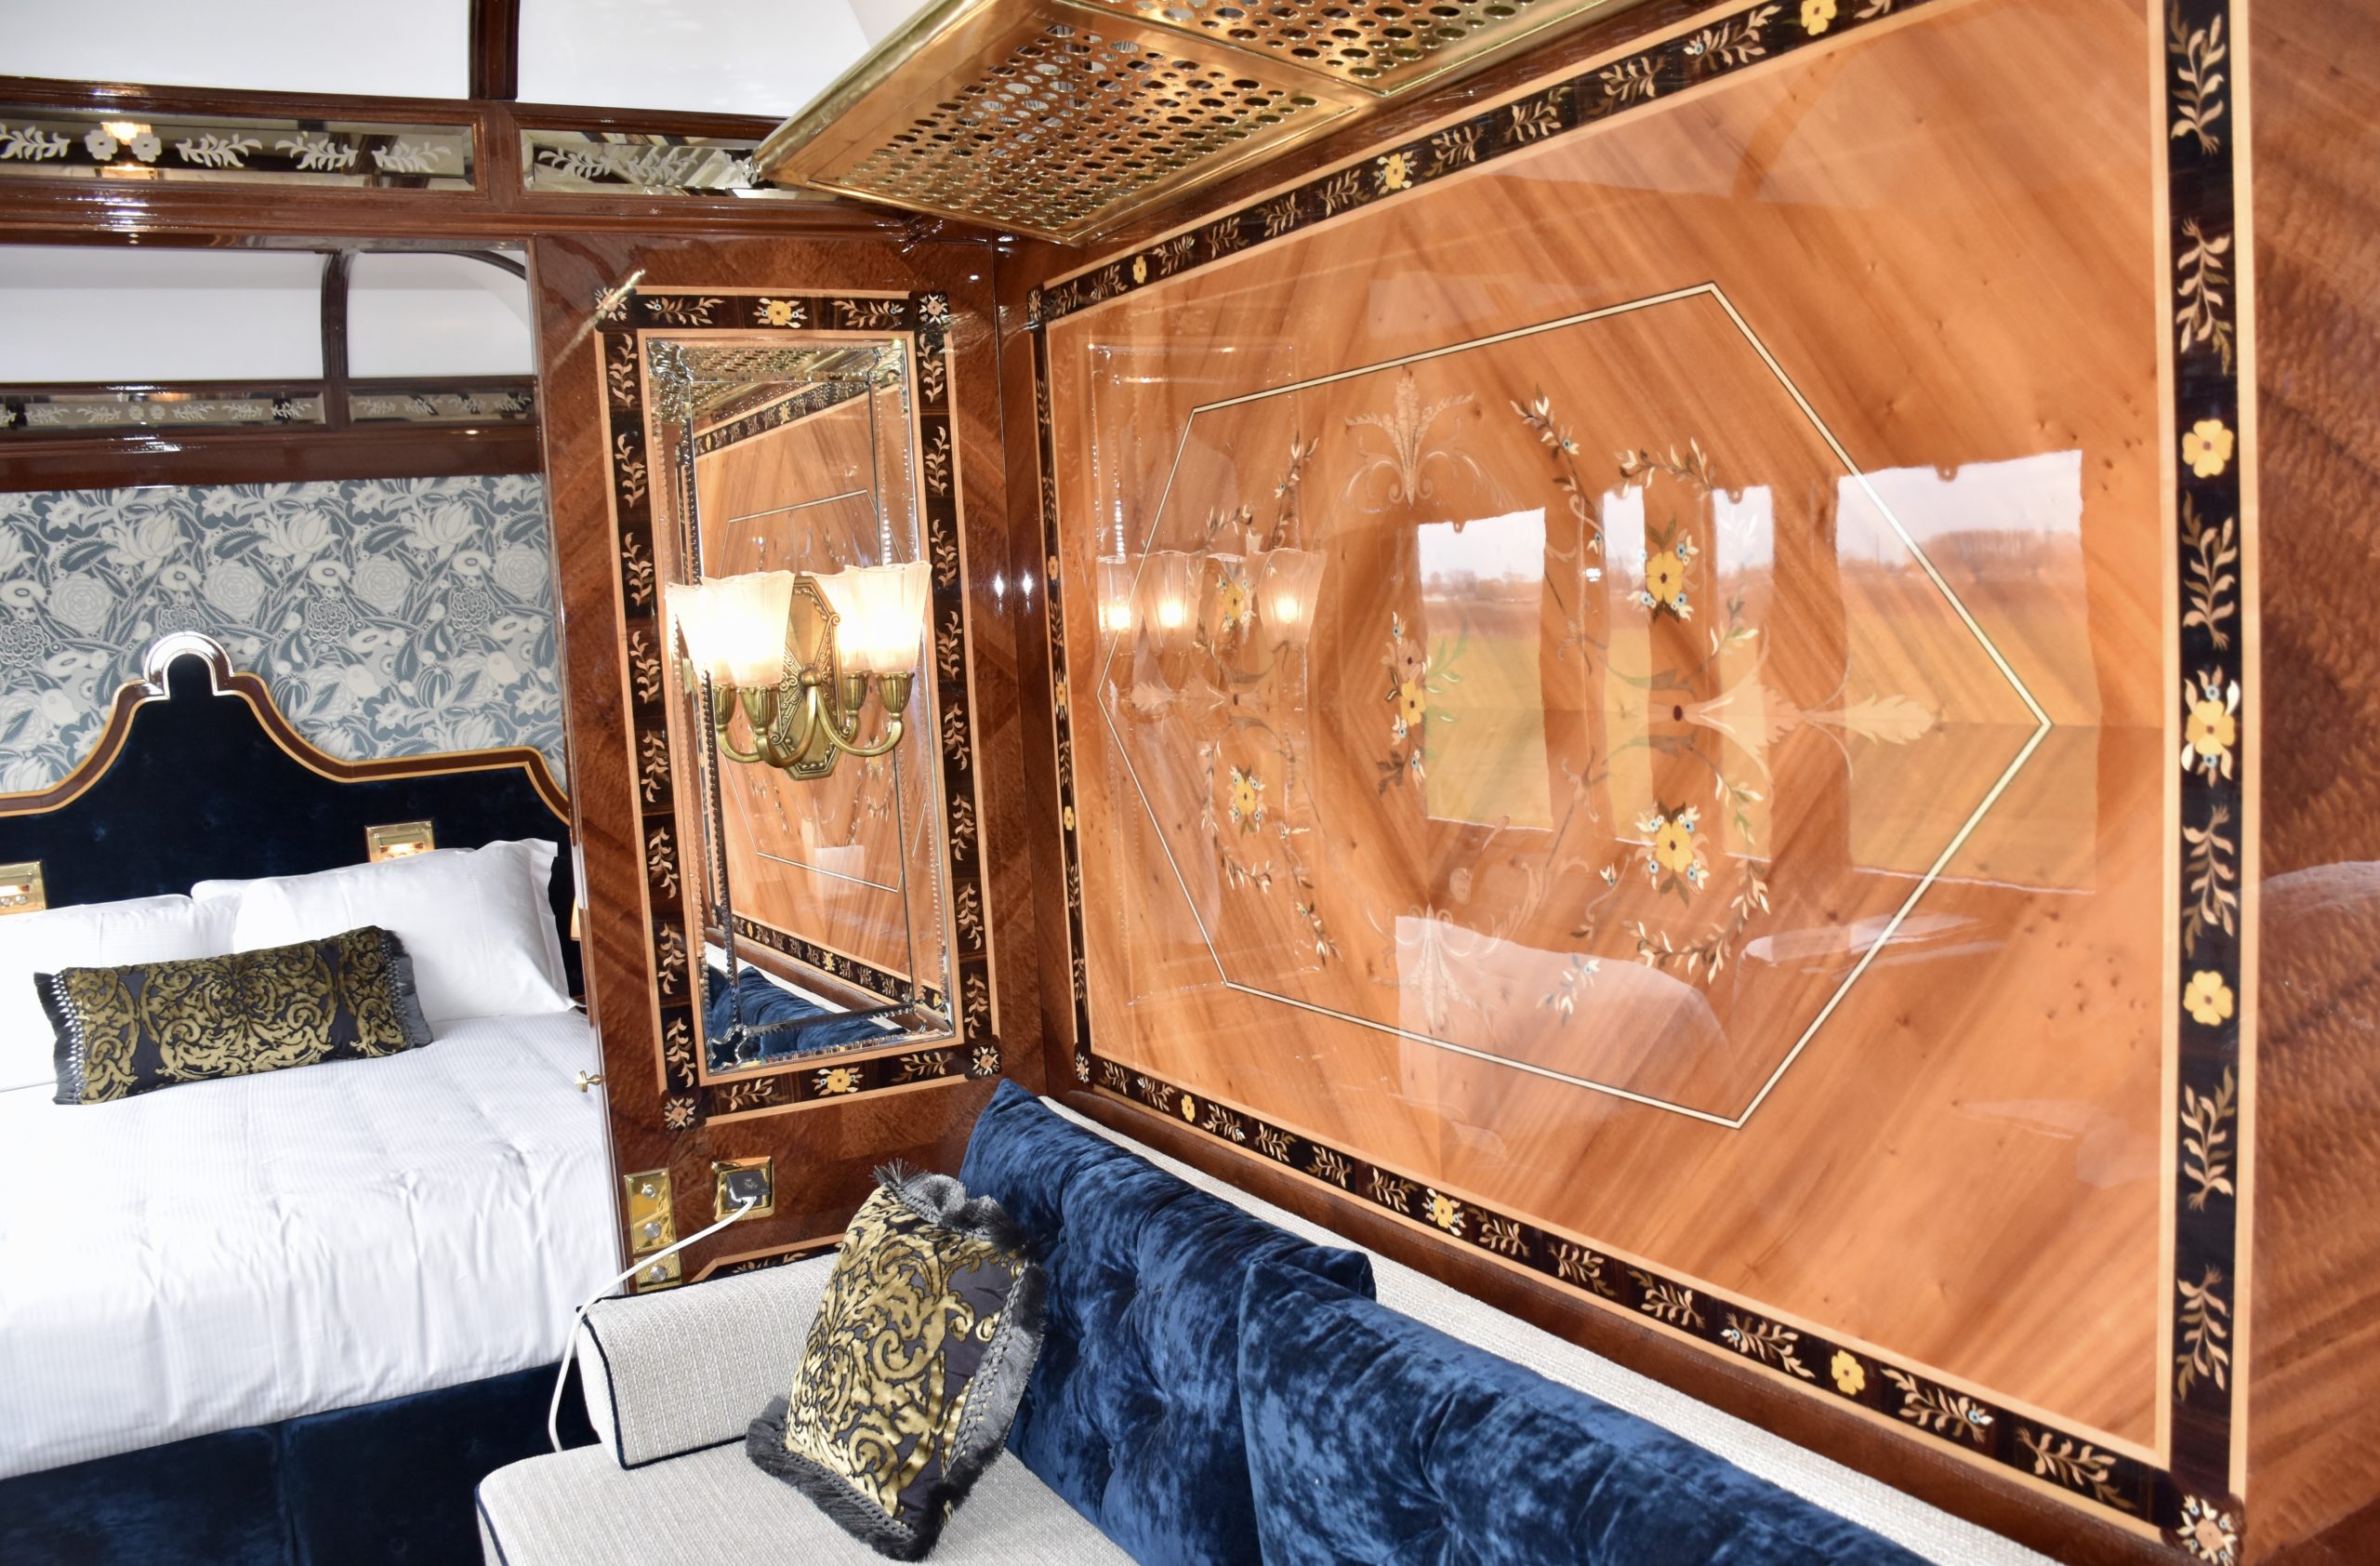 First review of the Venice Simplon-Orient-Express Grand Suites